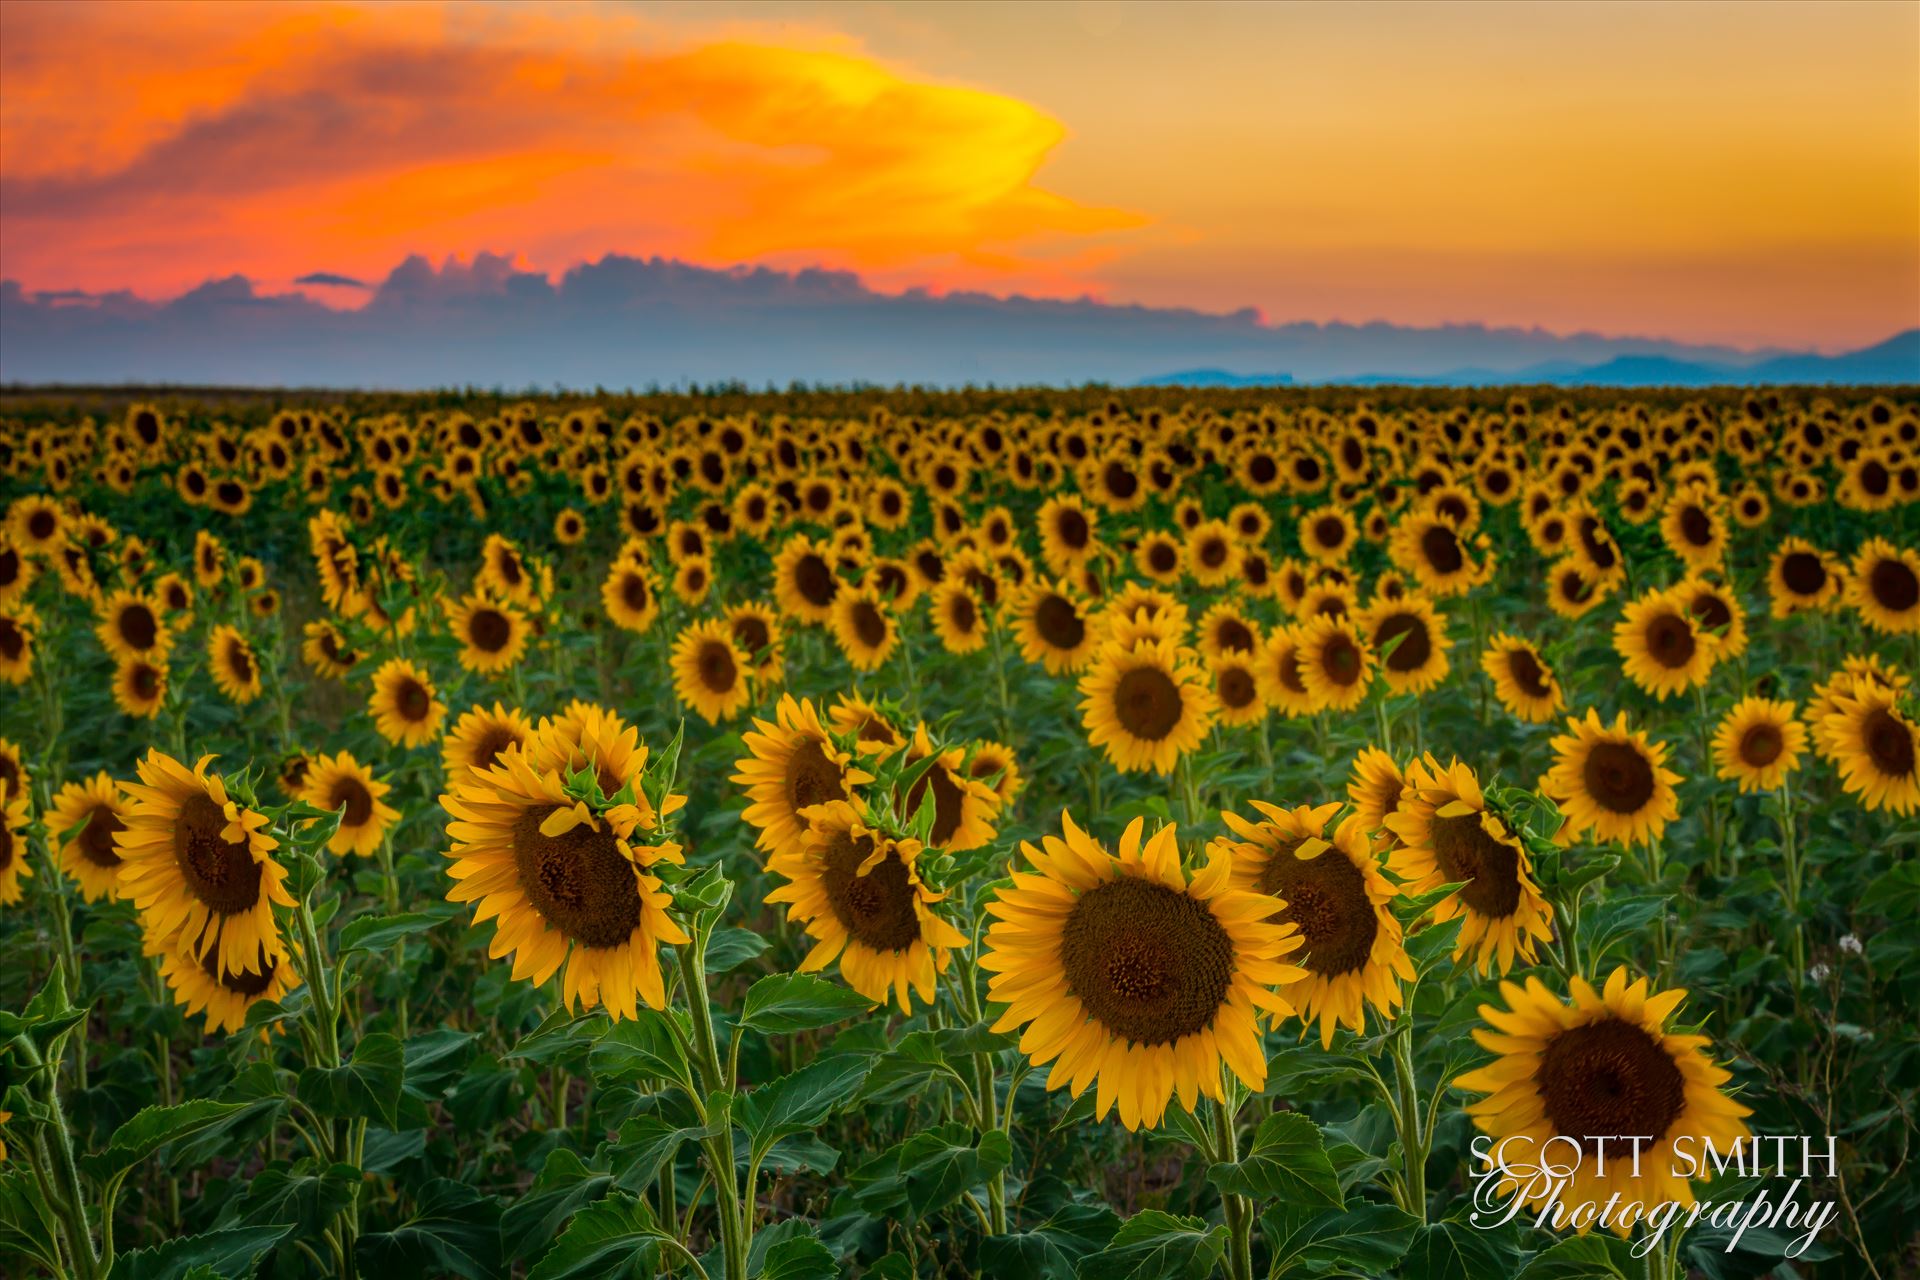 Denver Sunflowers at Sunset No 3 Sunflower fields near Denver International Airport, on August 20th, 2016. Near 56th and E470. by Scott Smith Photos